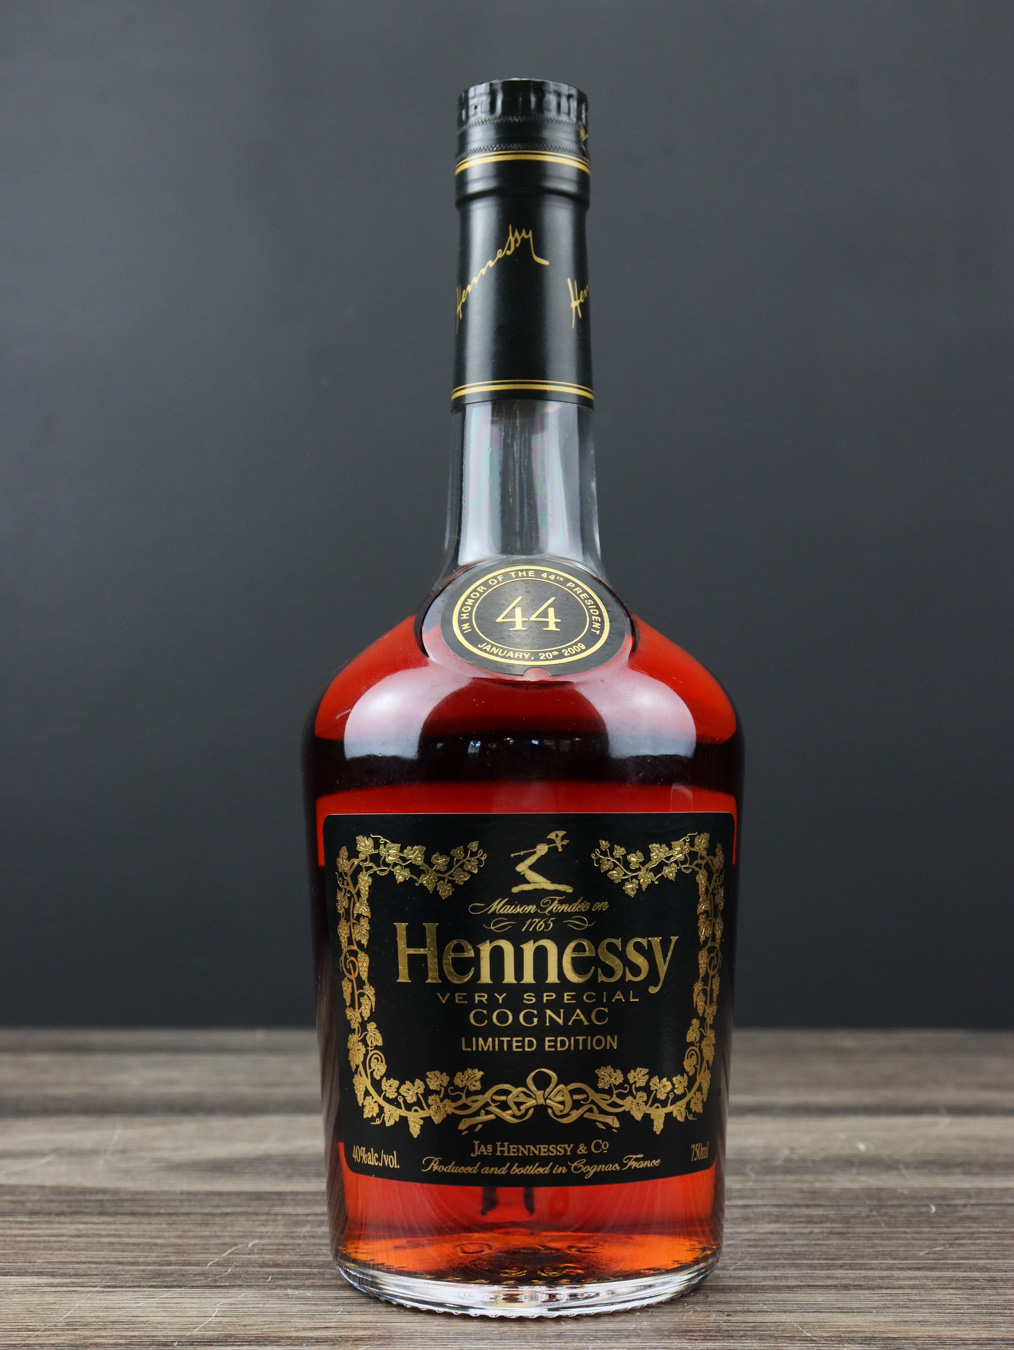 Hennessy Cognac Limited Edition V.S. In honor of the 44th